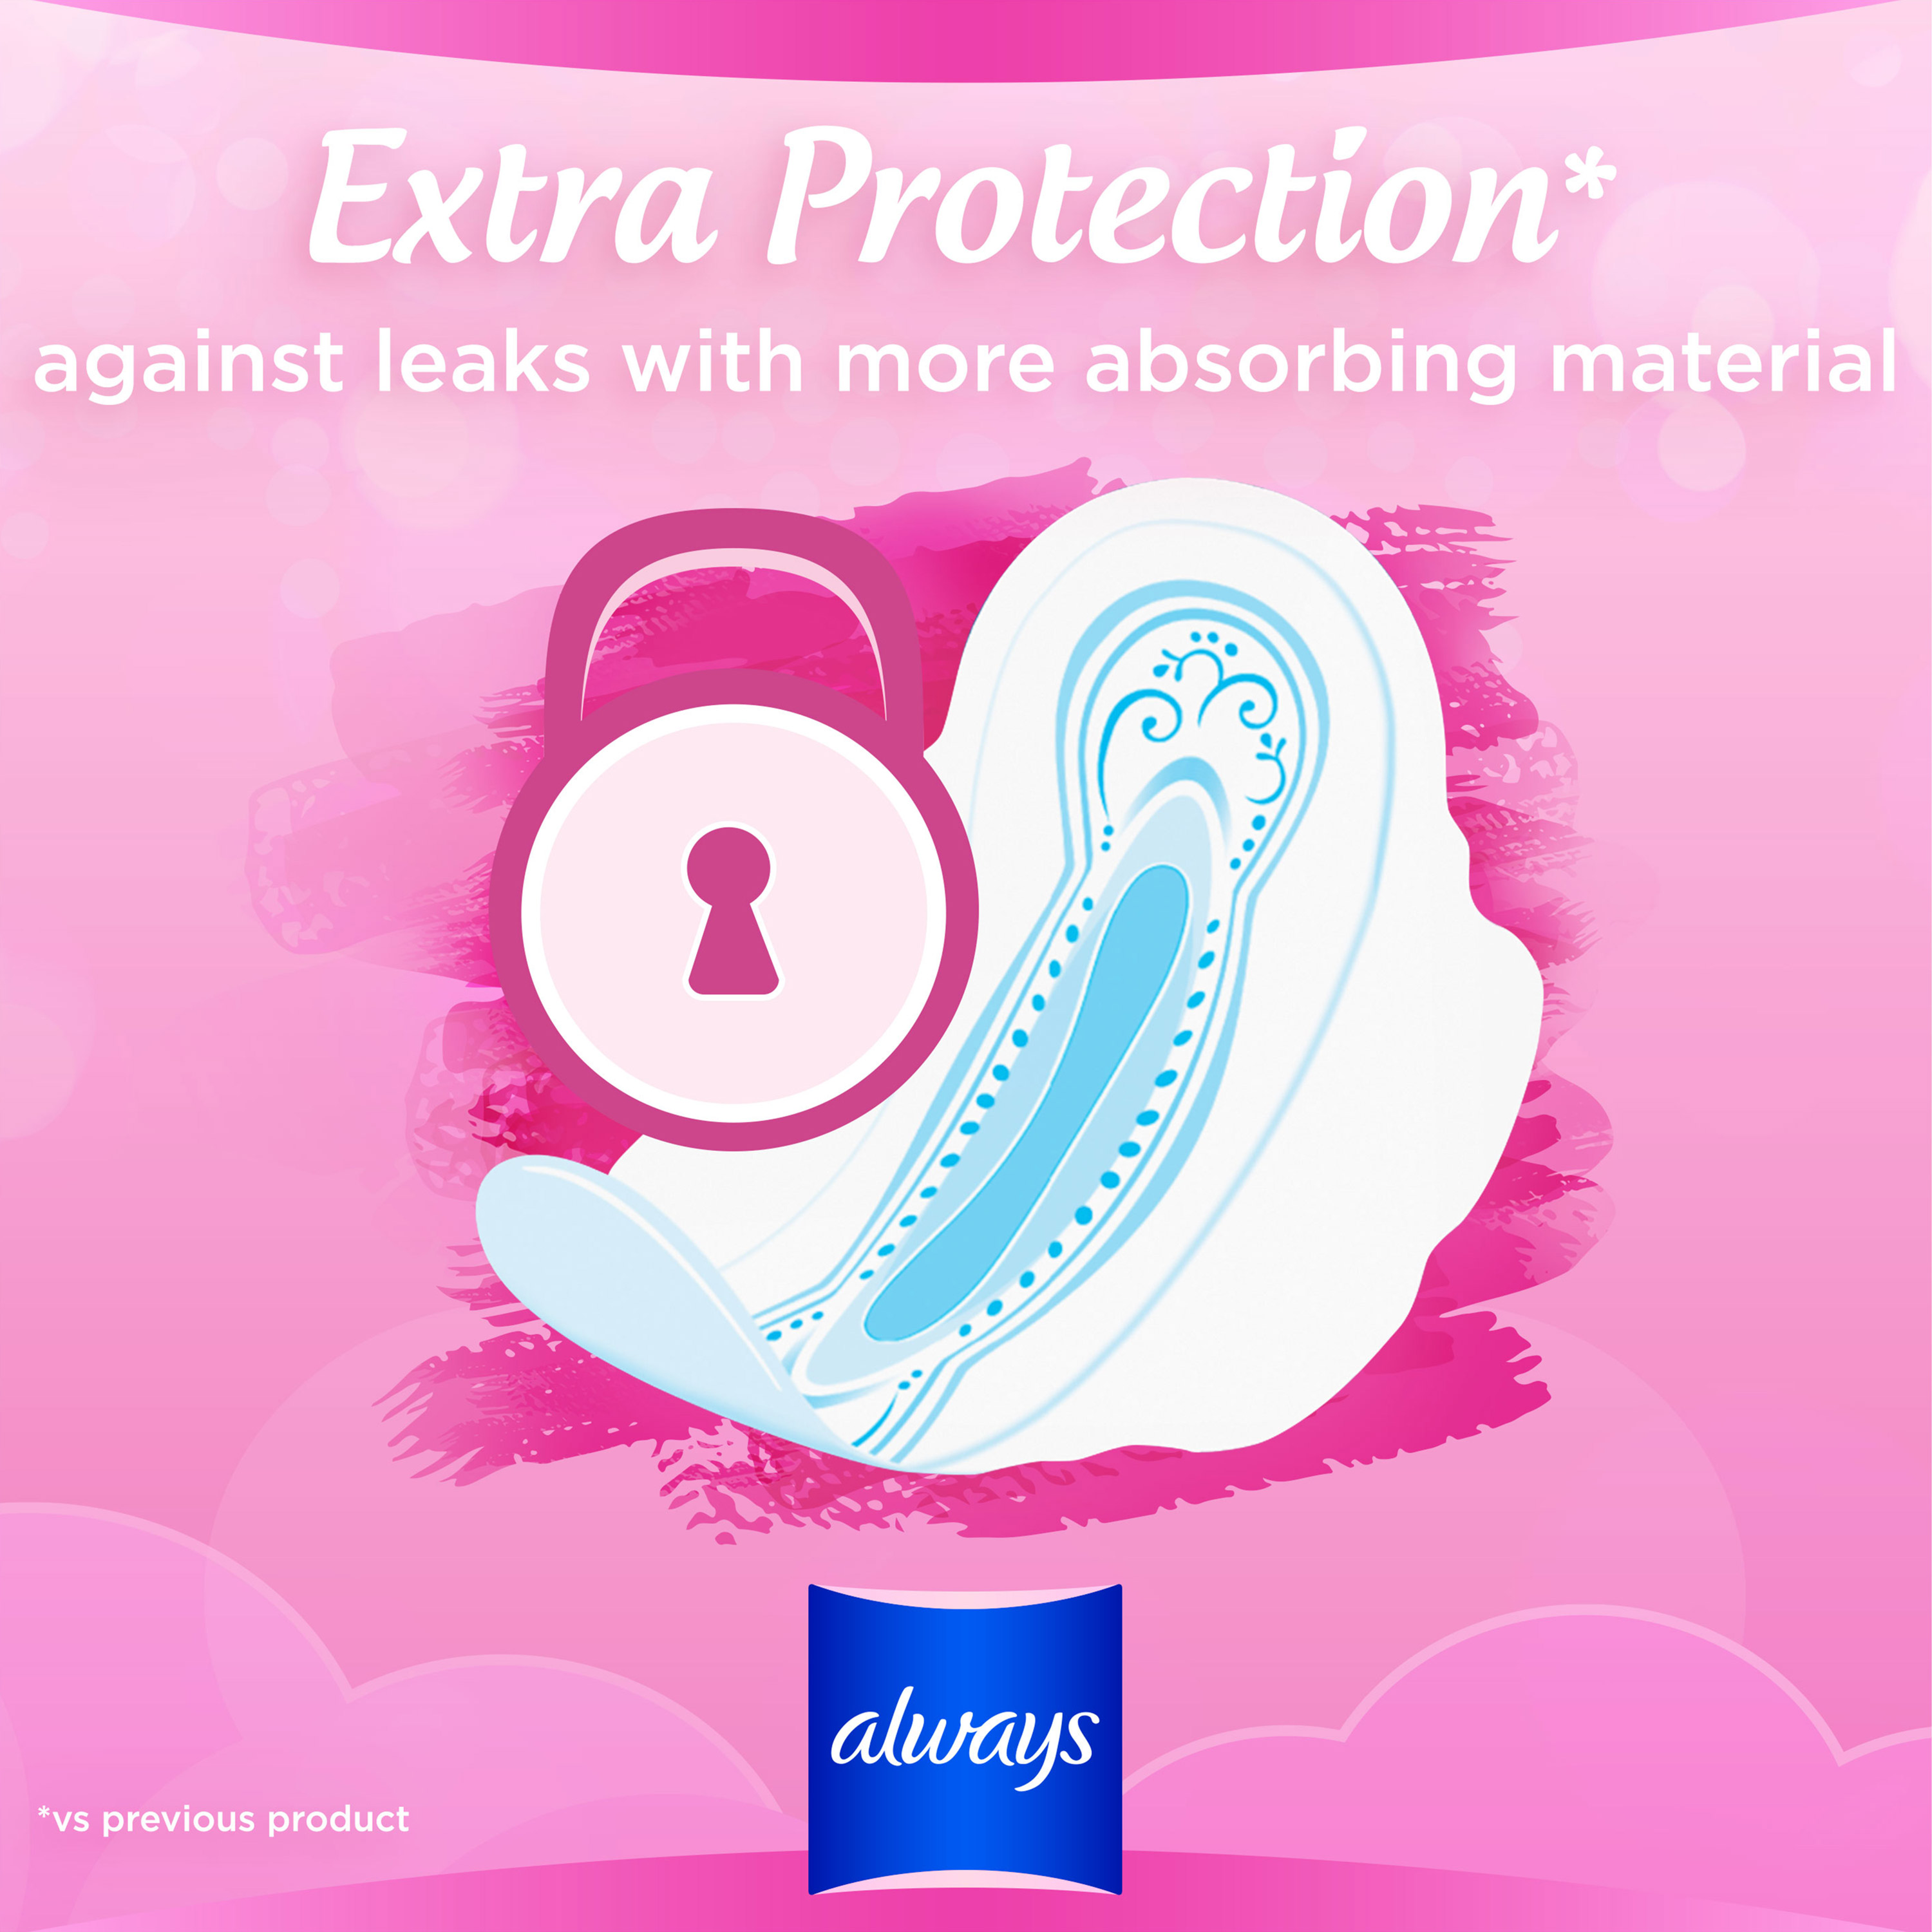 Can you wear a sanitary pad while swimming?